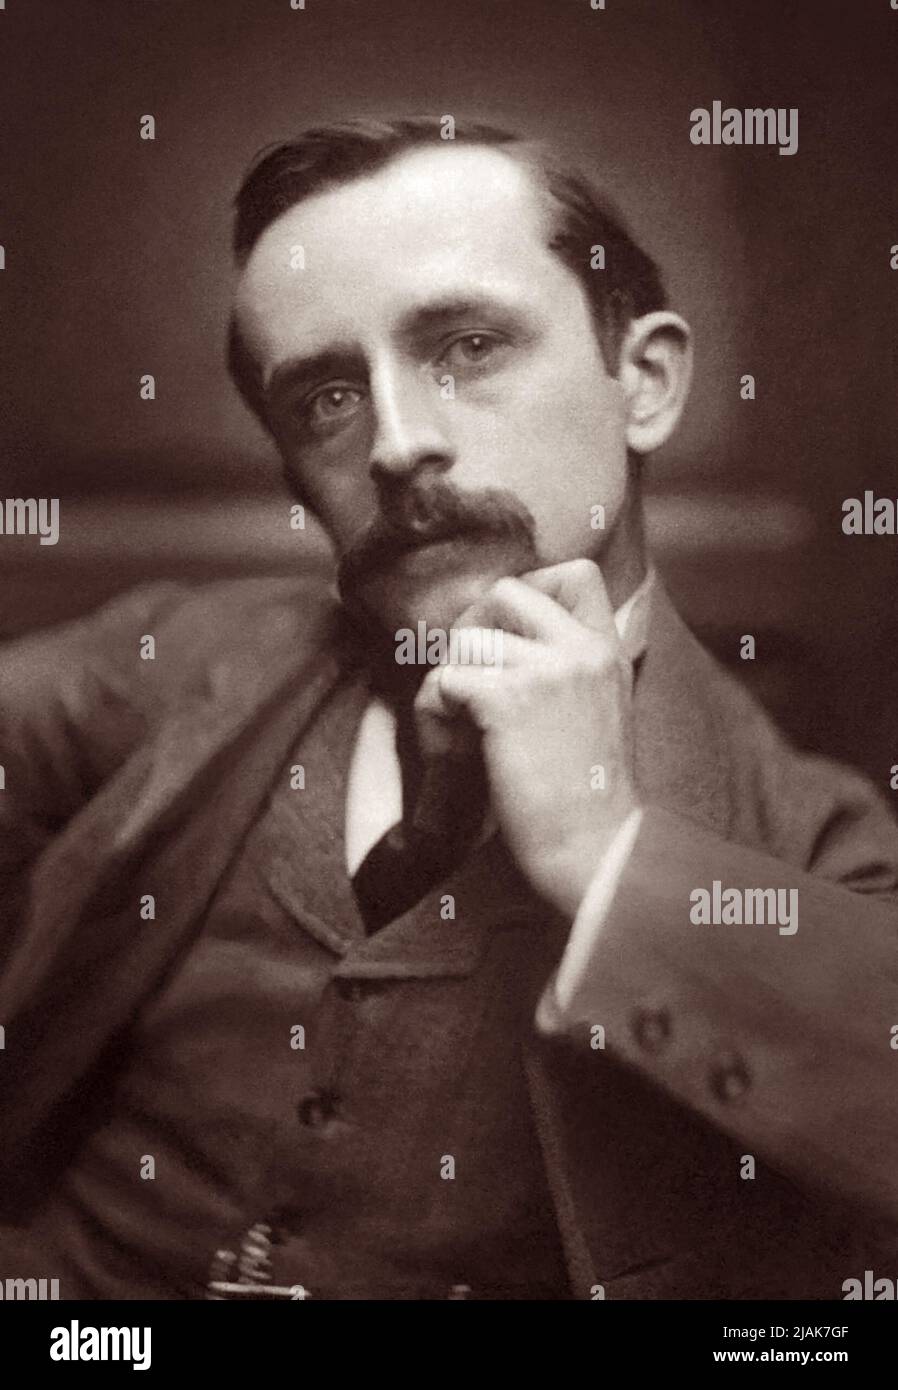 Sir James Matthew (J.M.) Barrie (1860-1937), Scottish dramatist and novelist best known as the author of Peter Pan, in an 1892 portrait by Frederick Hollyer. Stock Photo